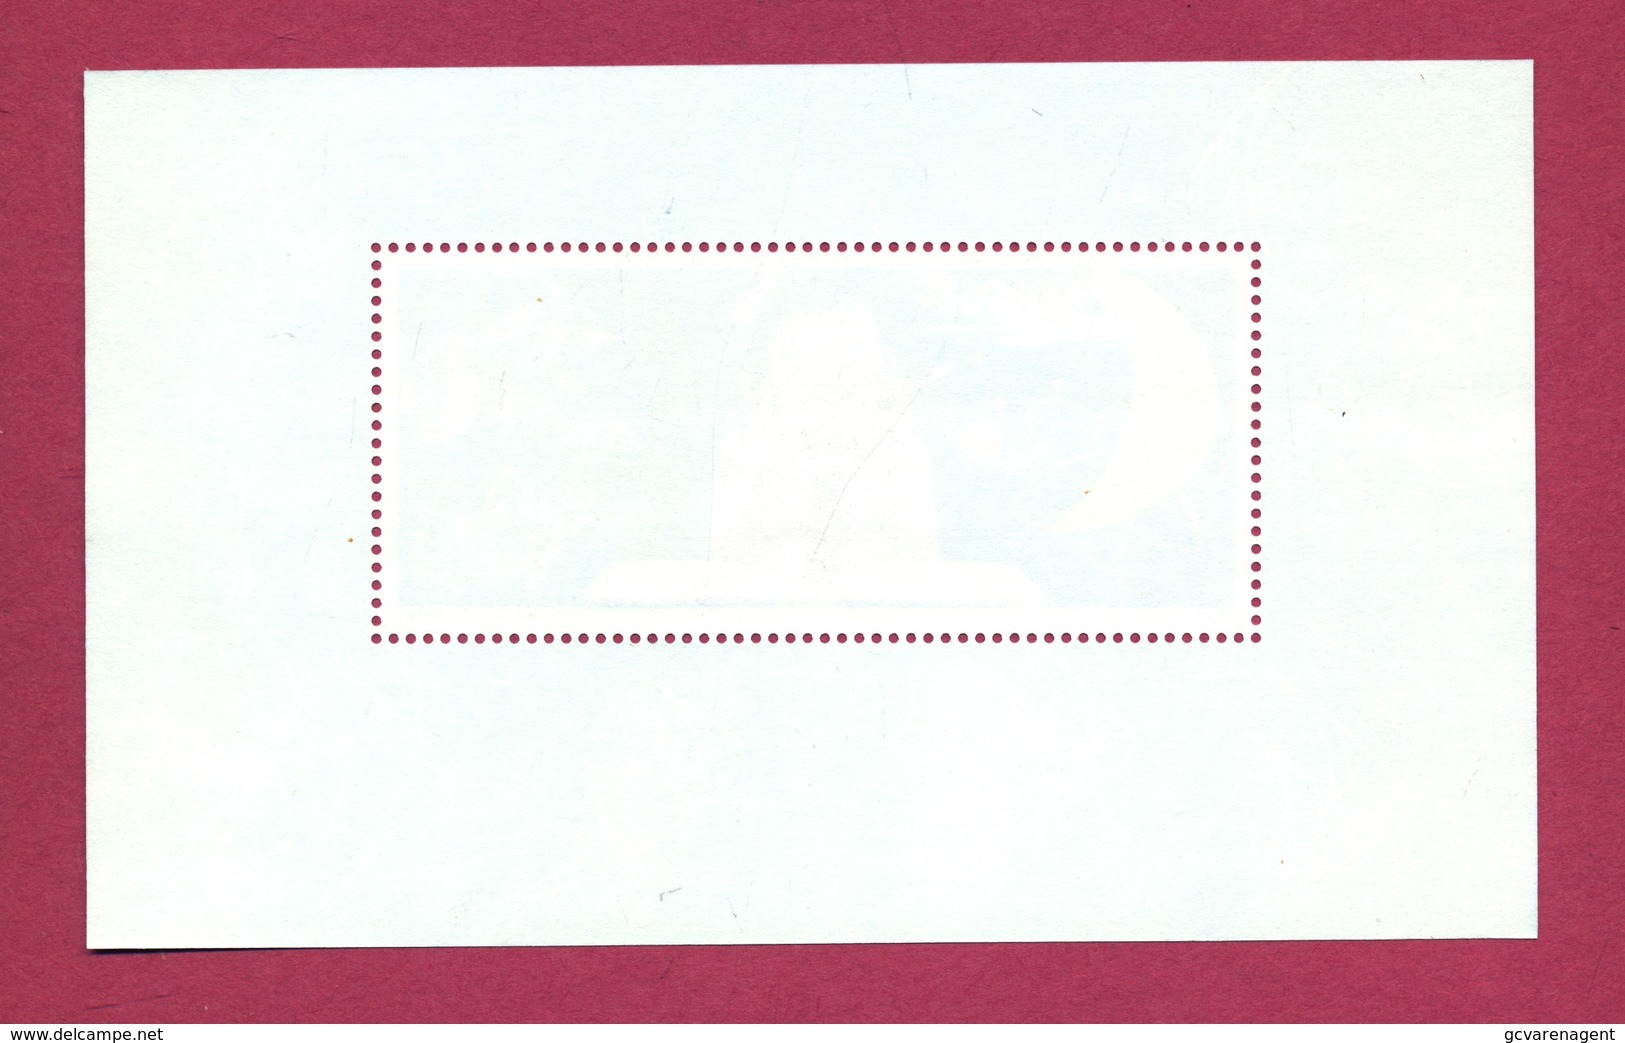 Chine - New - Neufs China  Block 23  _ 2 SCANS - Blocs-feuillets